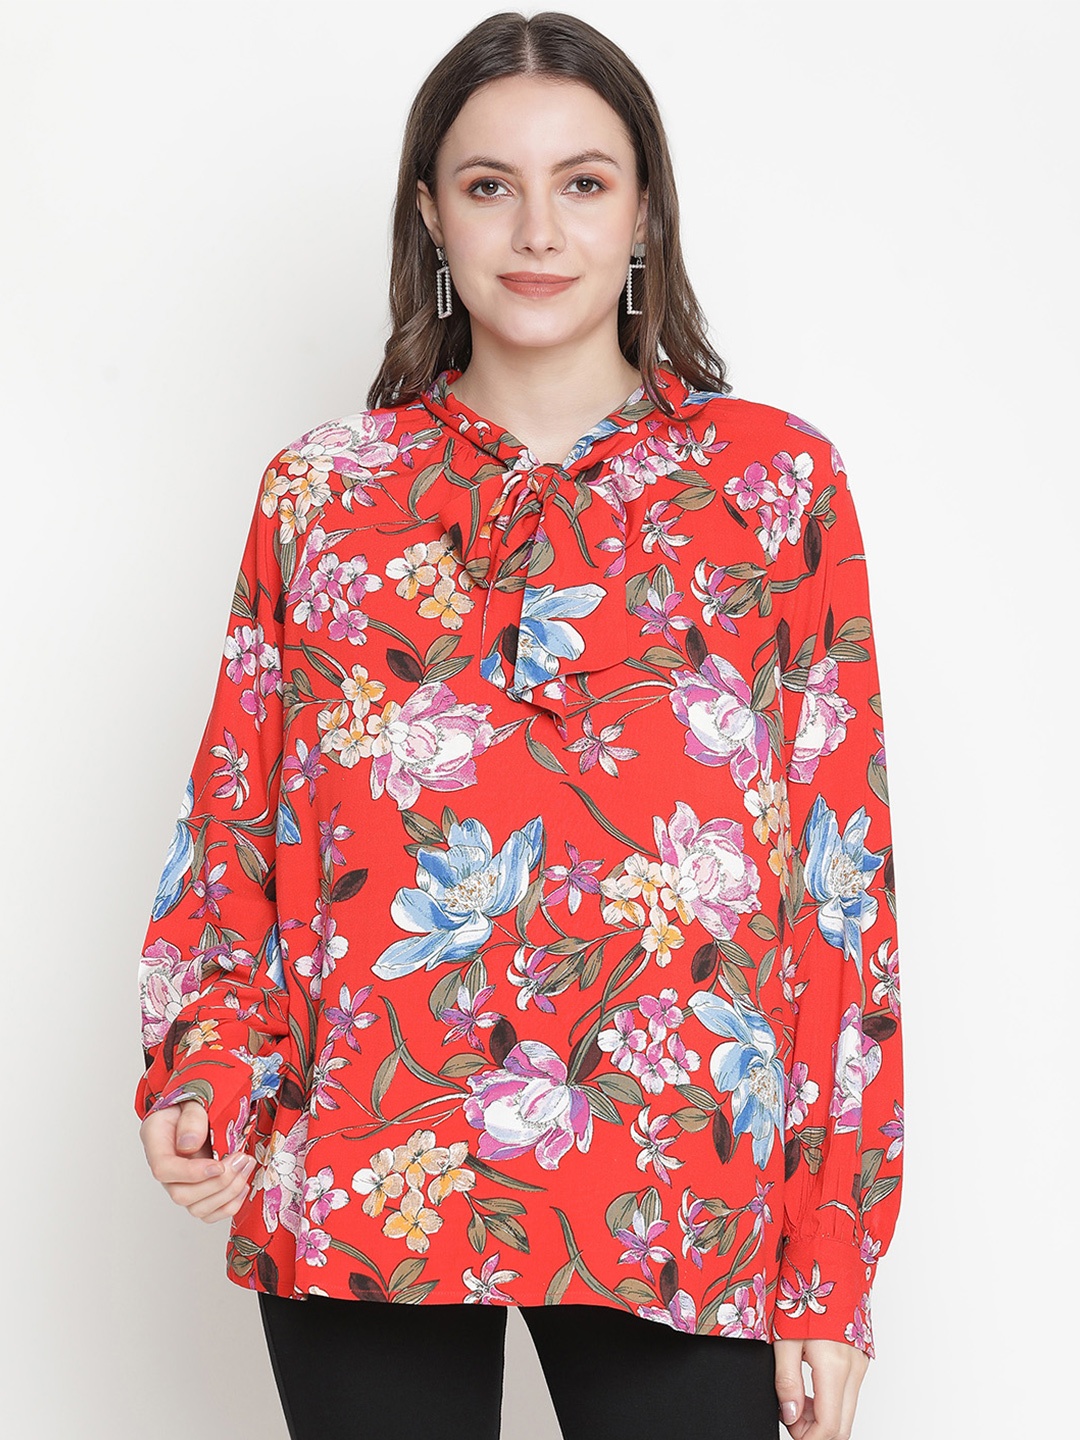 

Oxolloxo Red & Blue Floral Print Tie-Up Neck Crepe Shirt Style Top